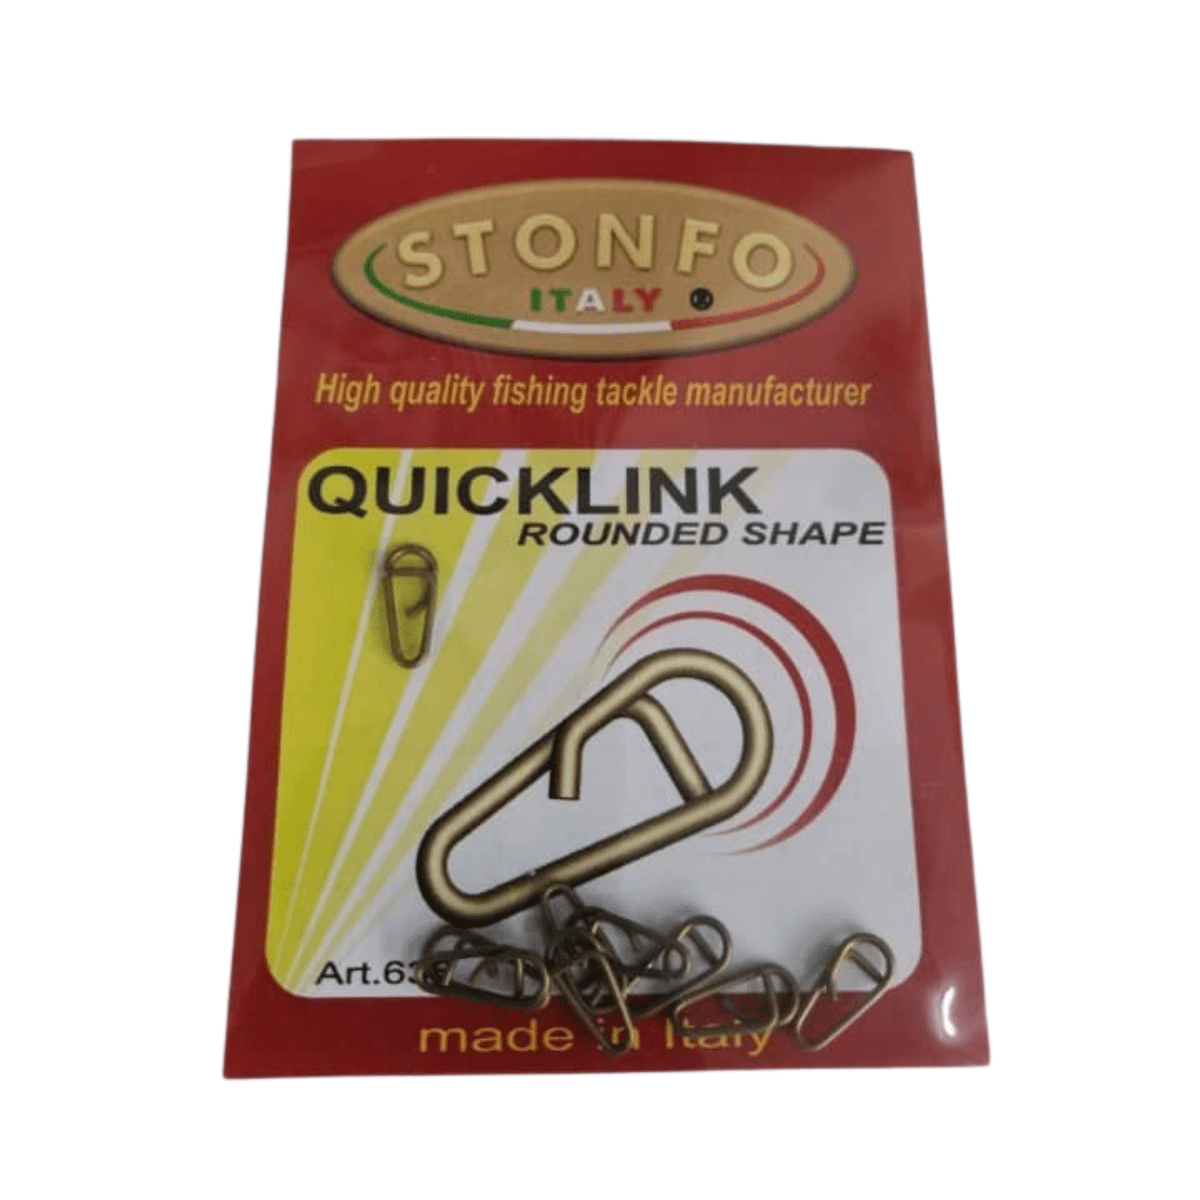 Stonfo Quicklink Rounded shape